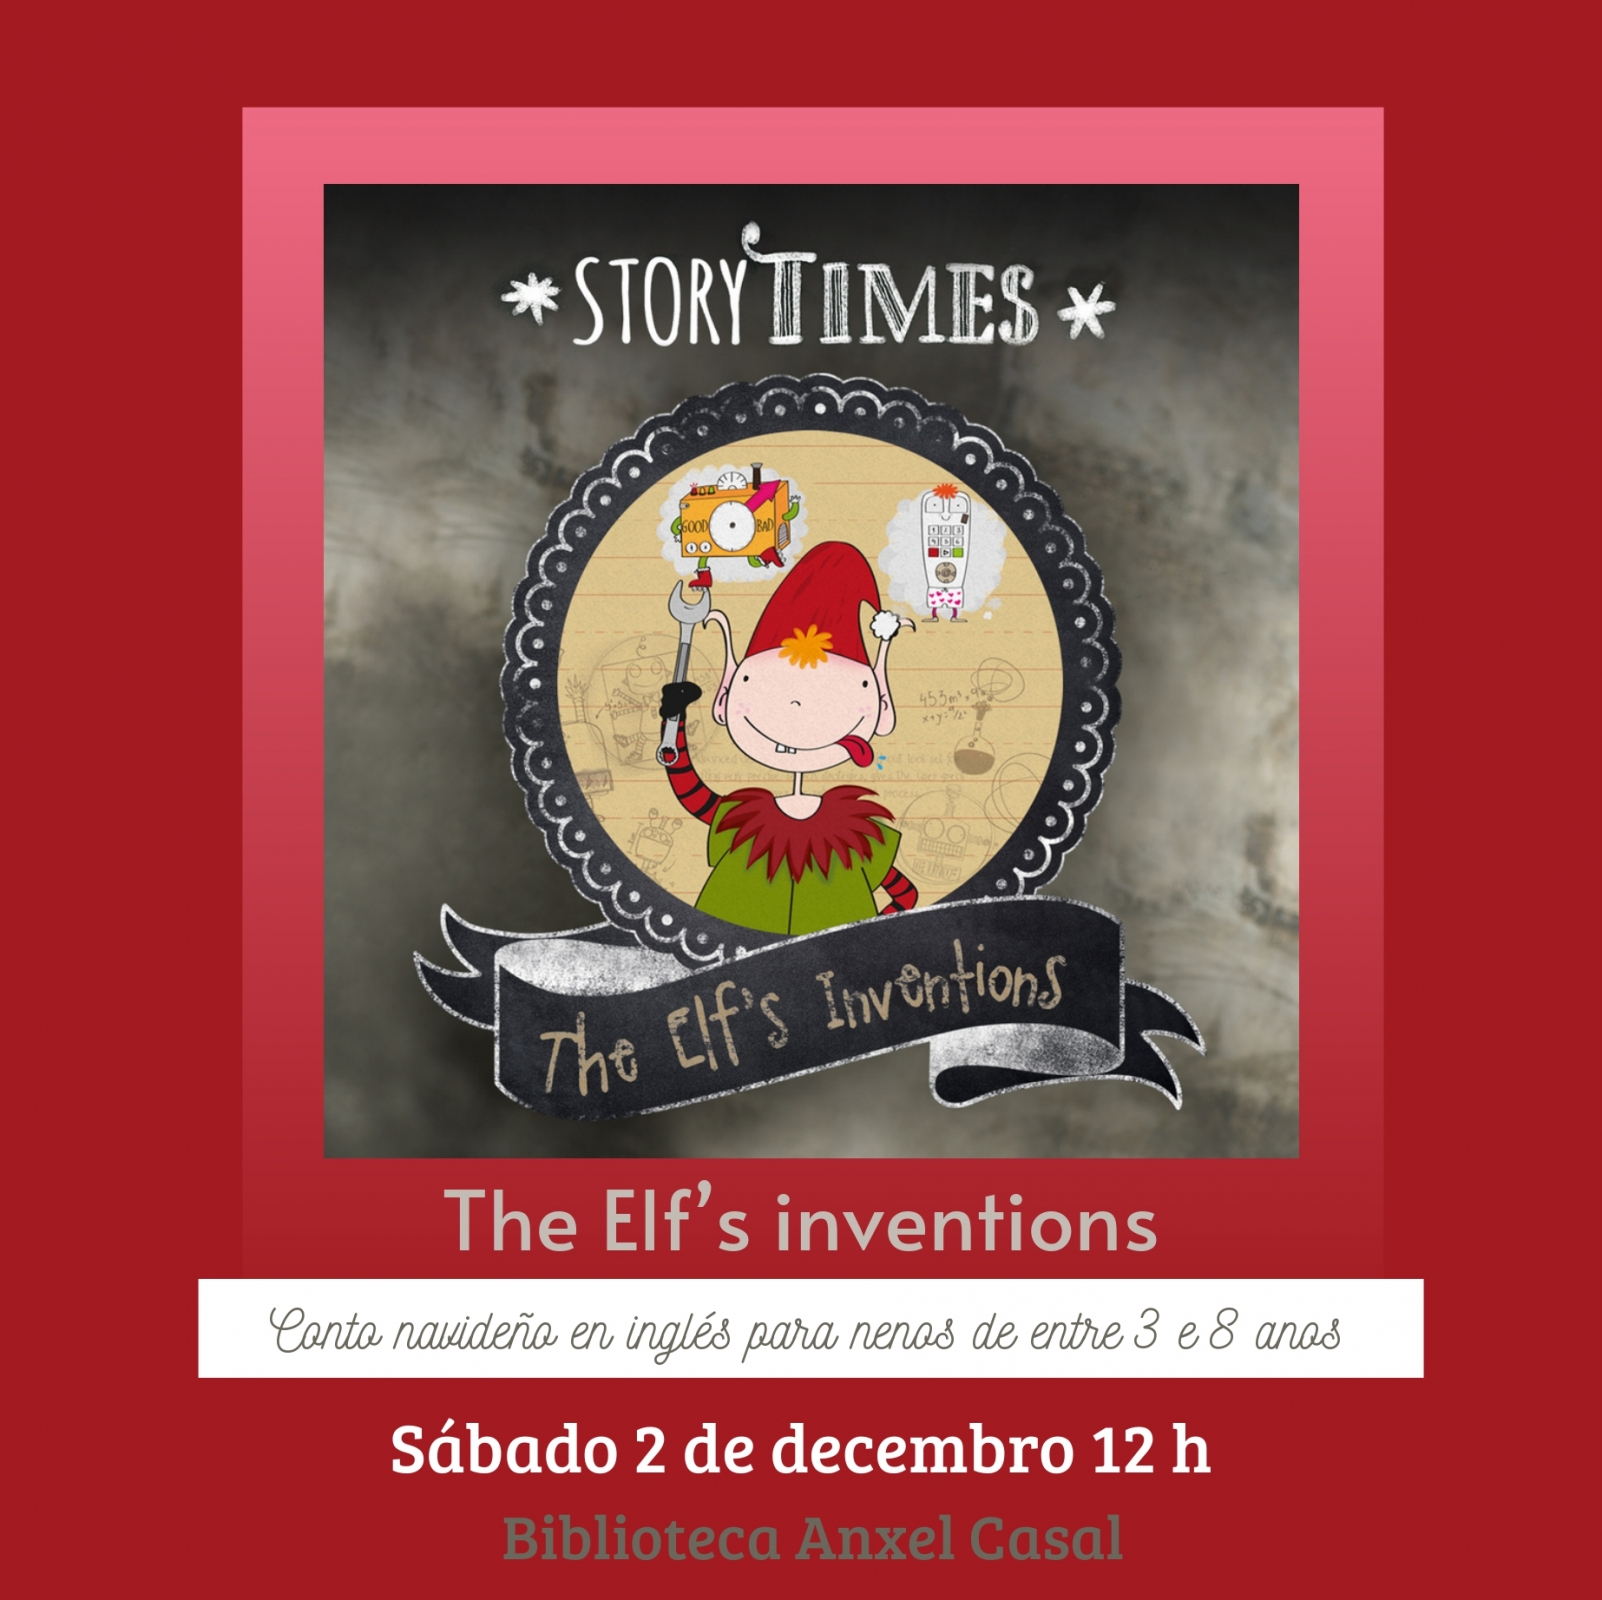 The elf's inventions